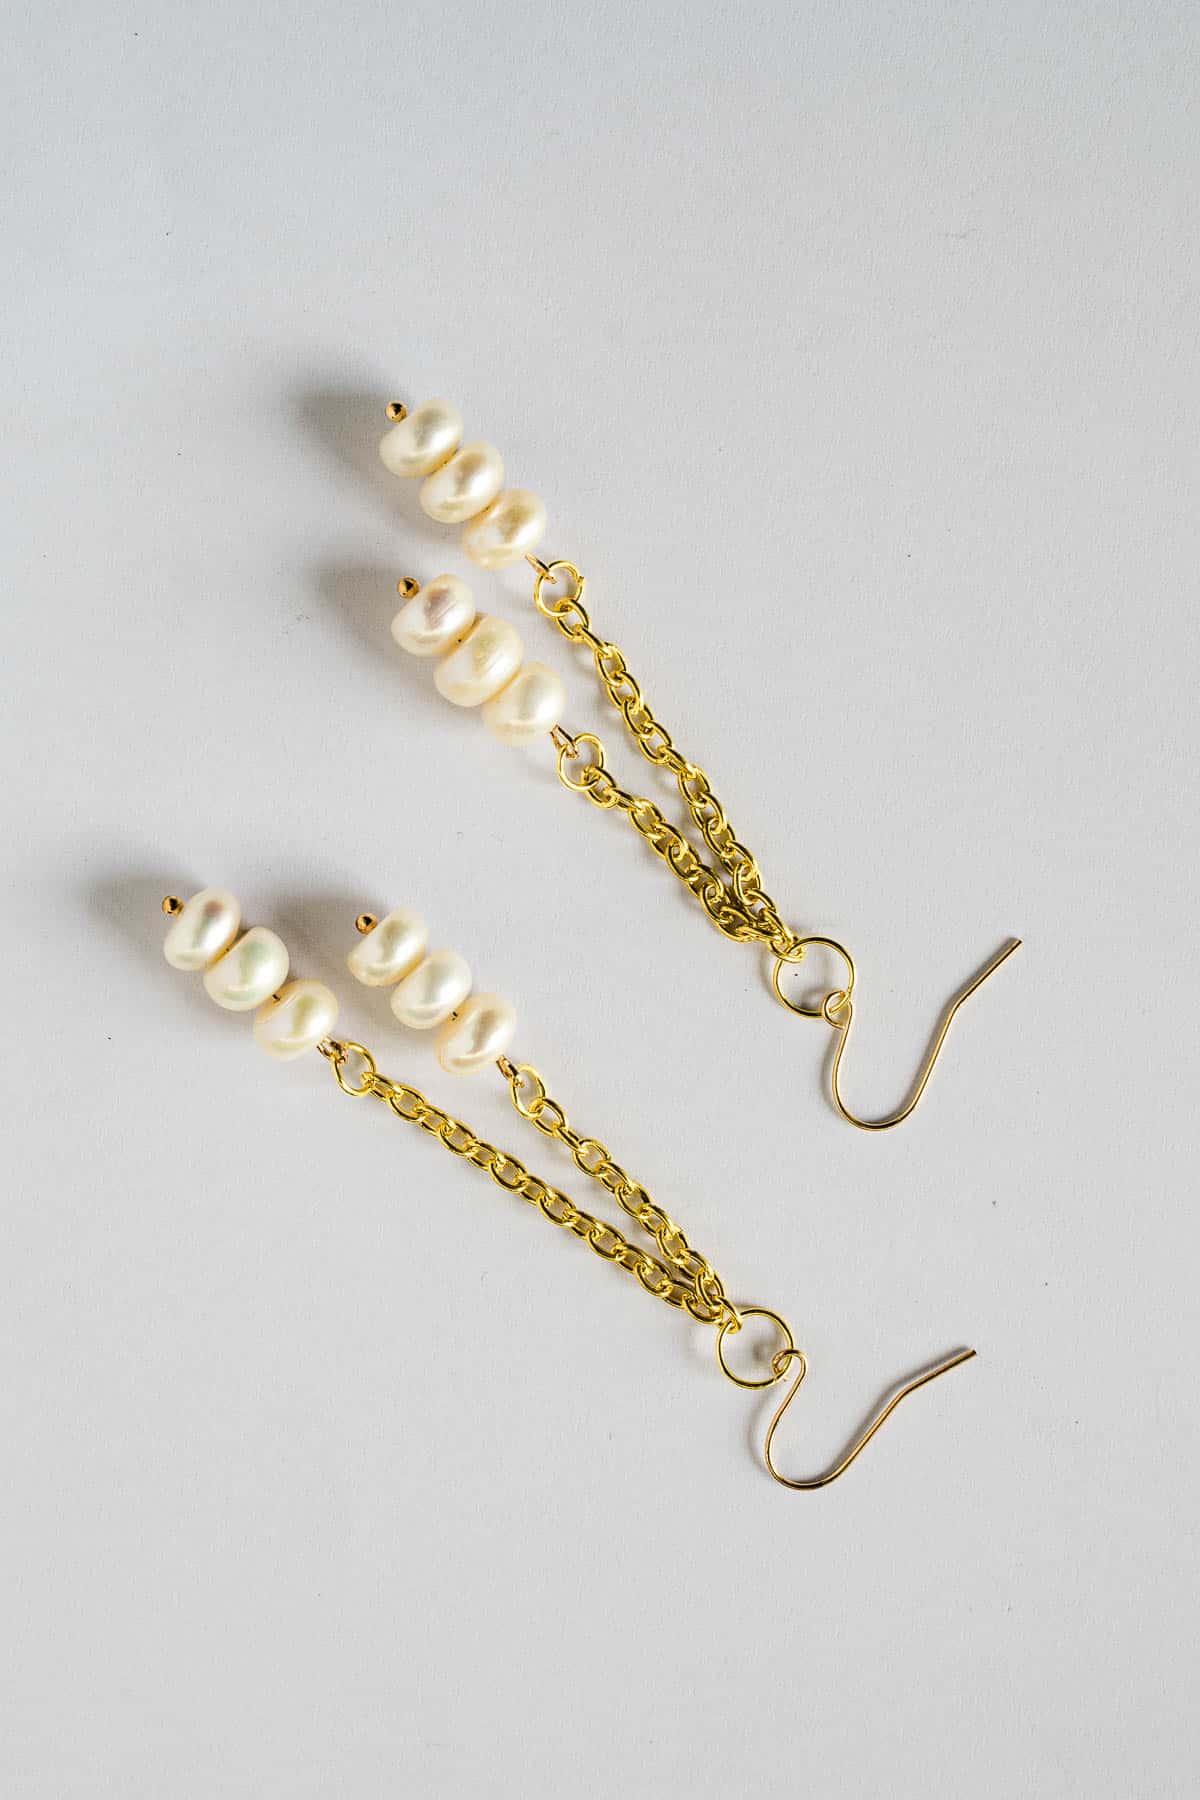 A pair of long white and gold freshwater pearl DIY dangle earrings.